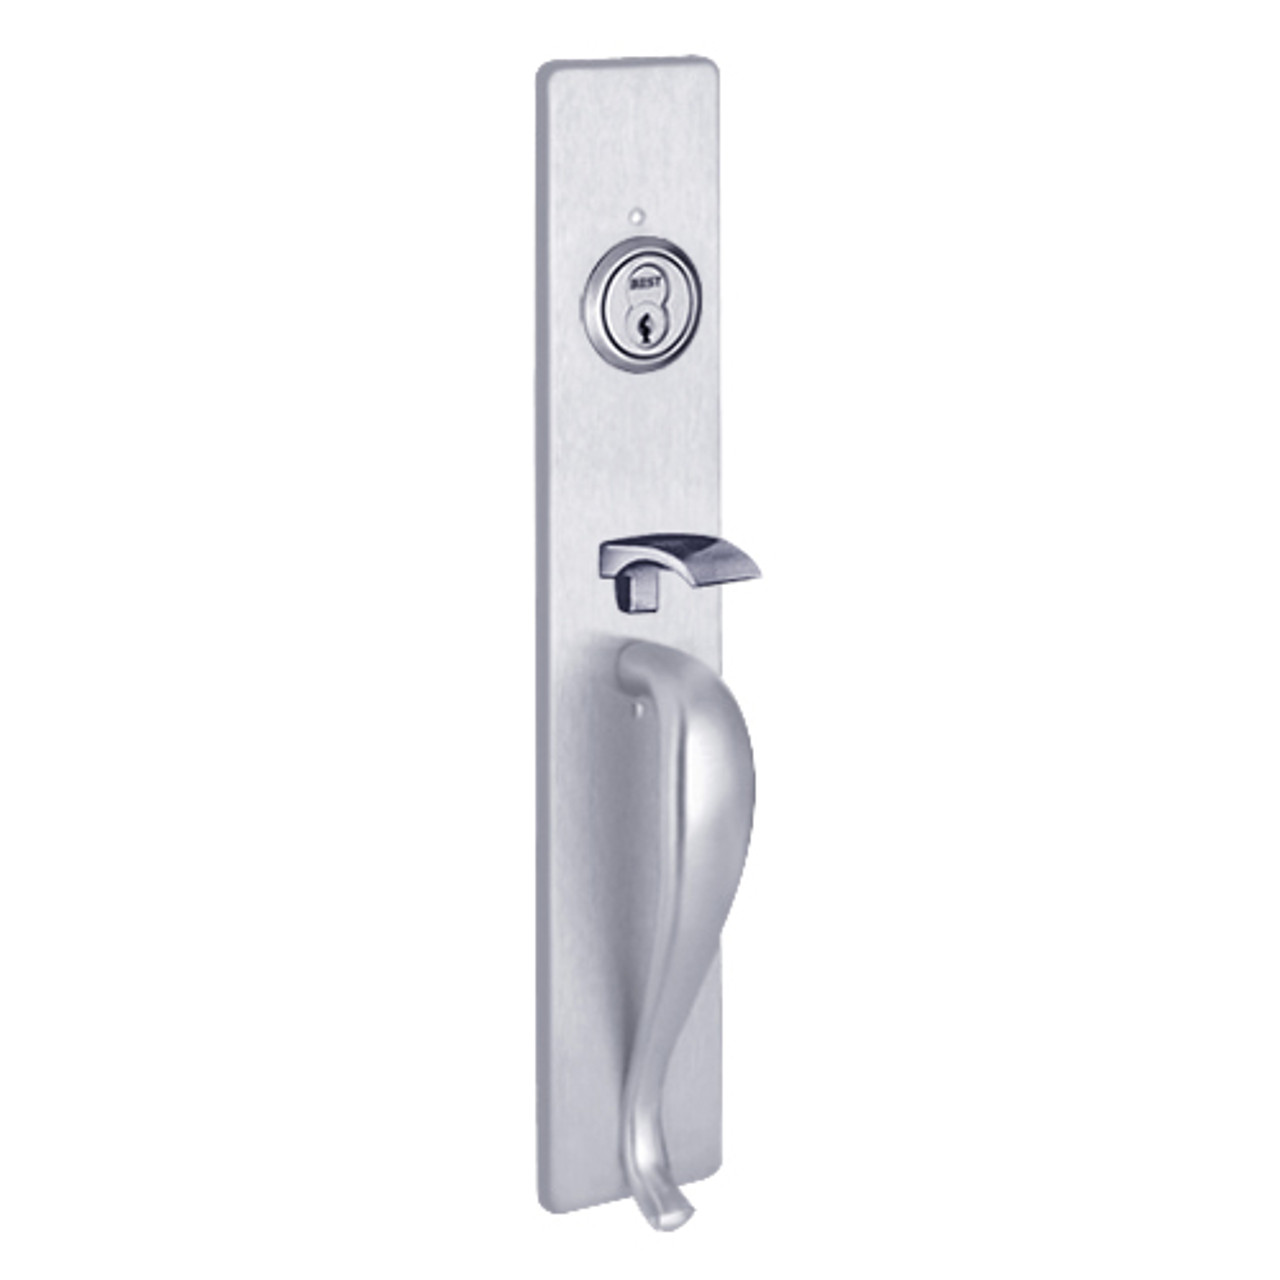 Y1705B-625 PHI Key Controls Thumb Piece Trim with B Design Pull for Olympian Series Device in Bright Chrome Finish